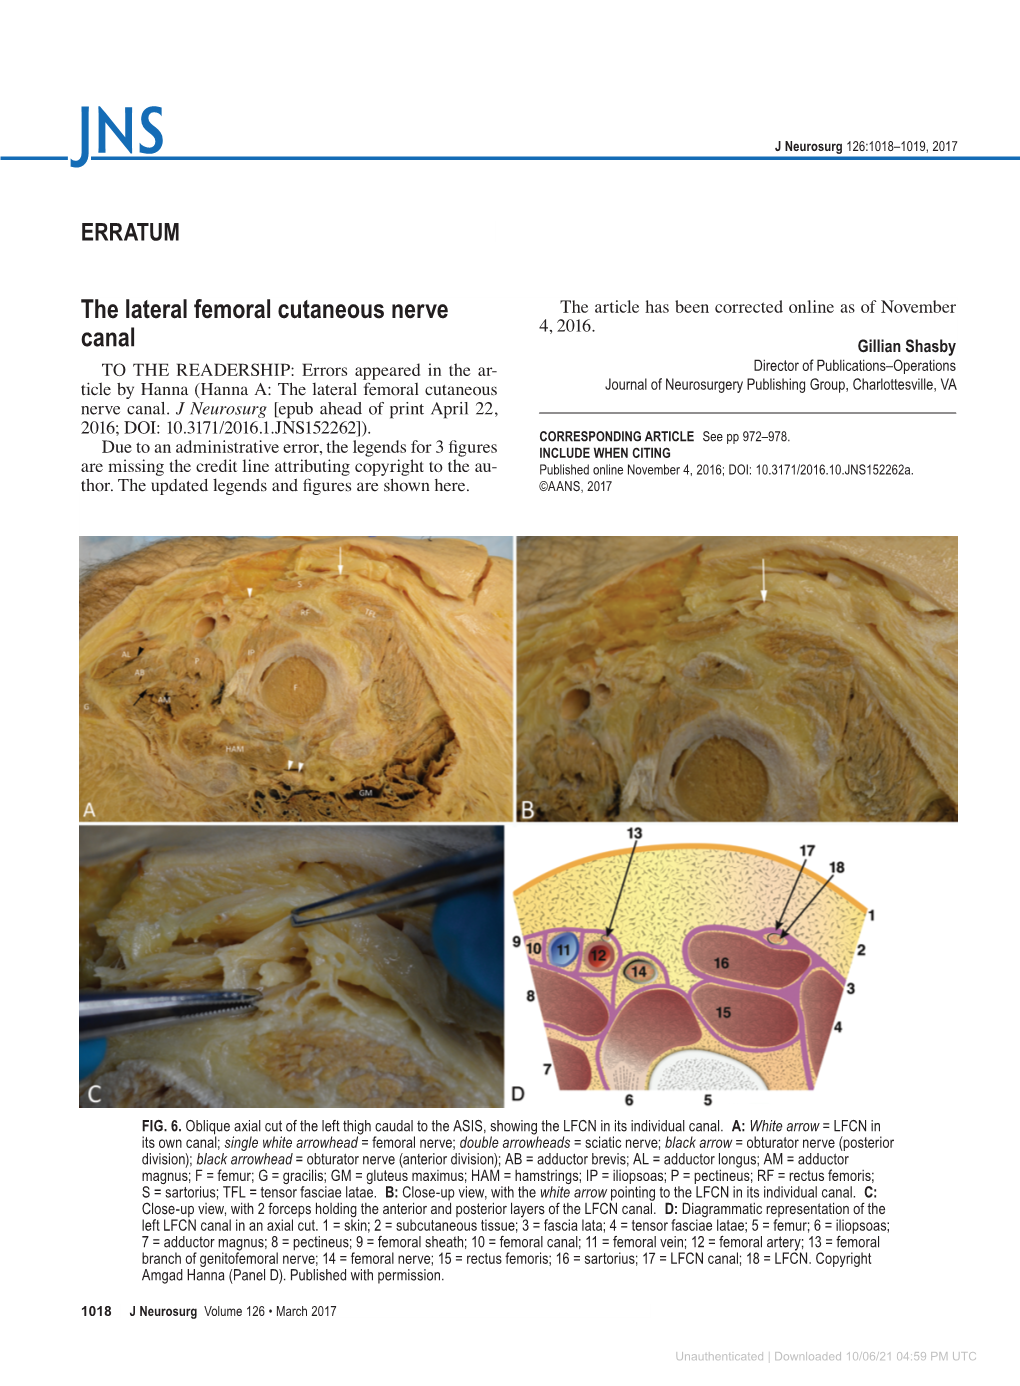 The Lateral Femoral Cutaneous Nerve Canal